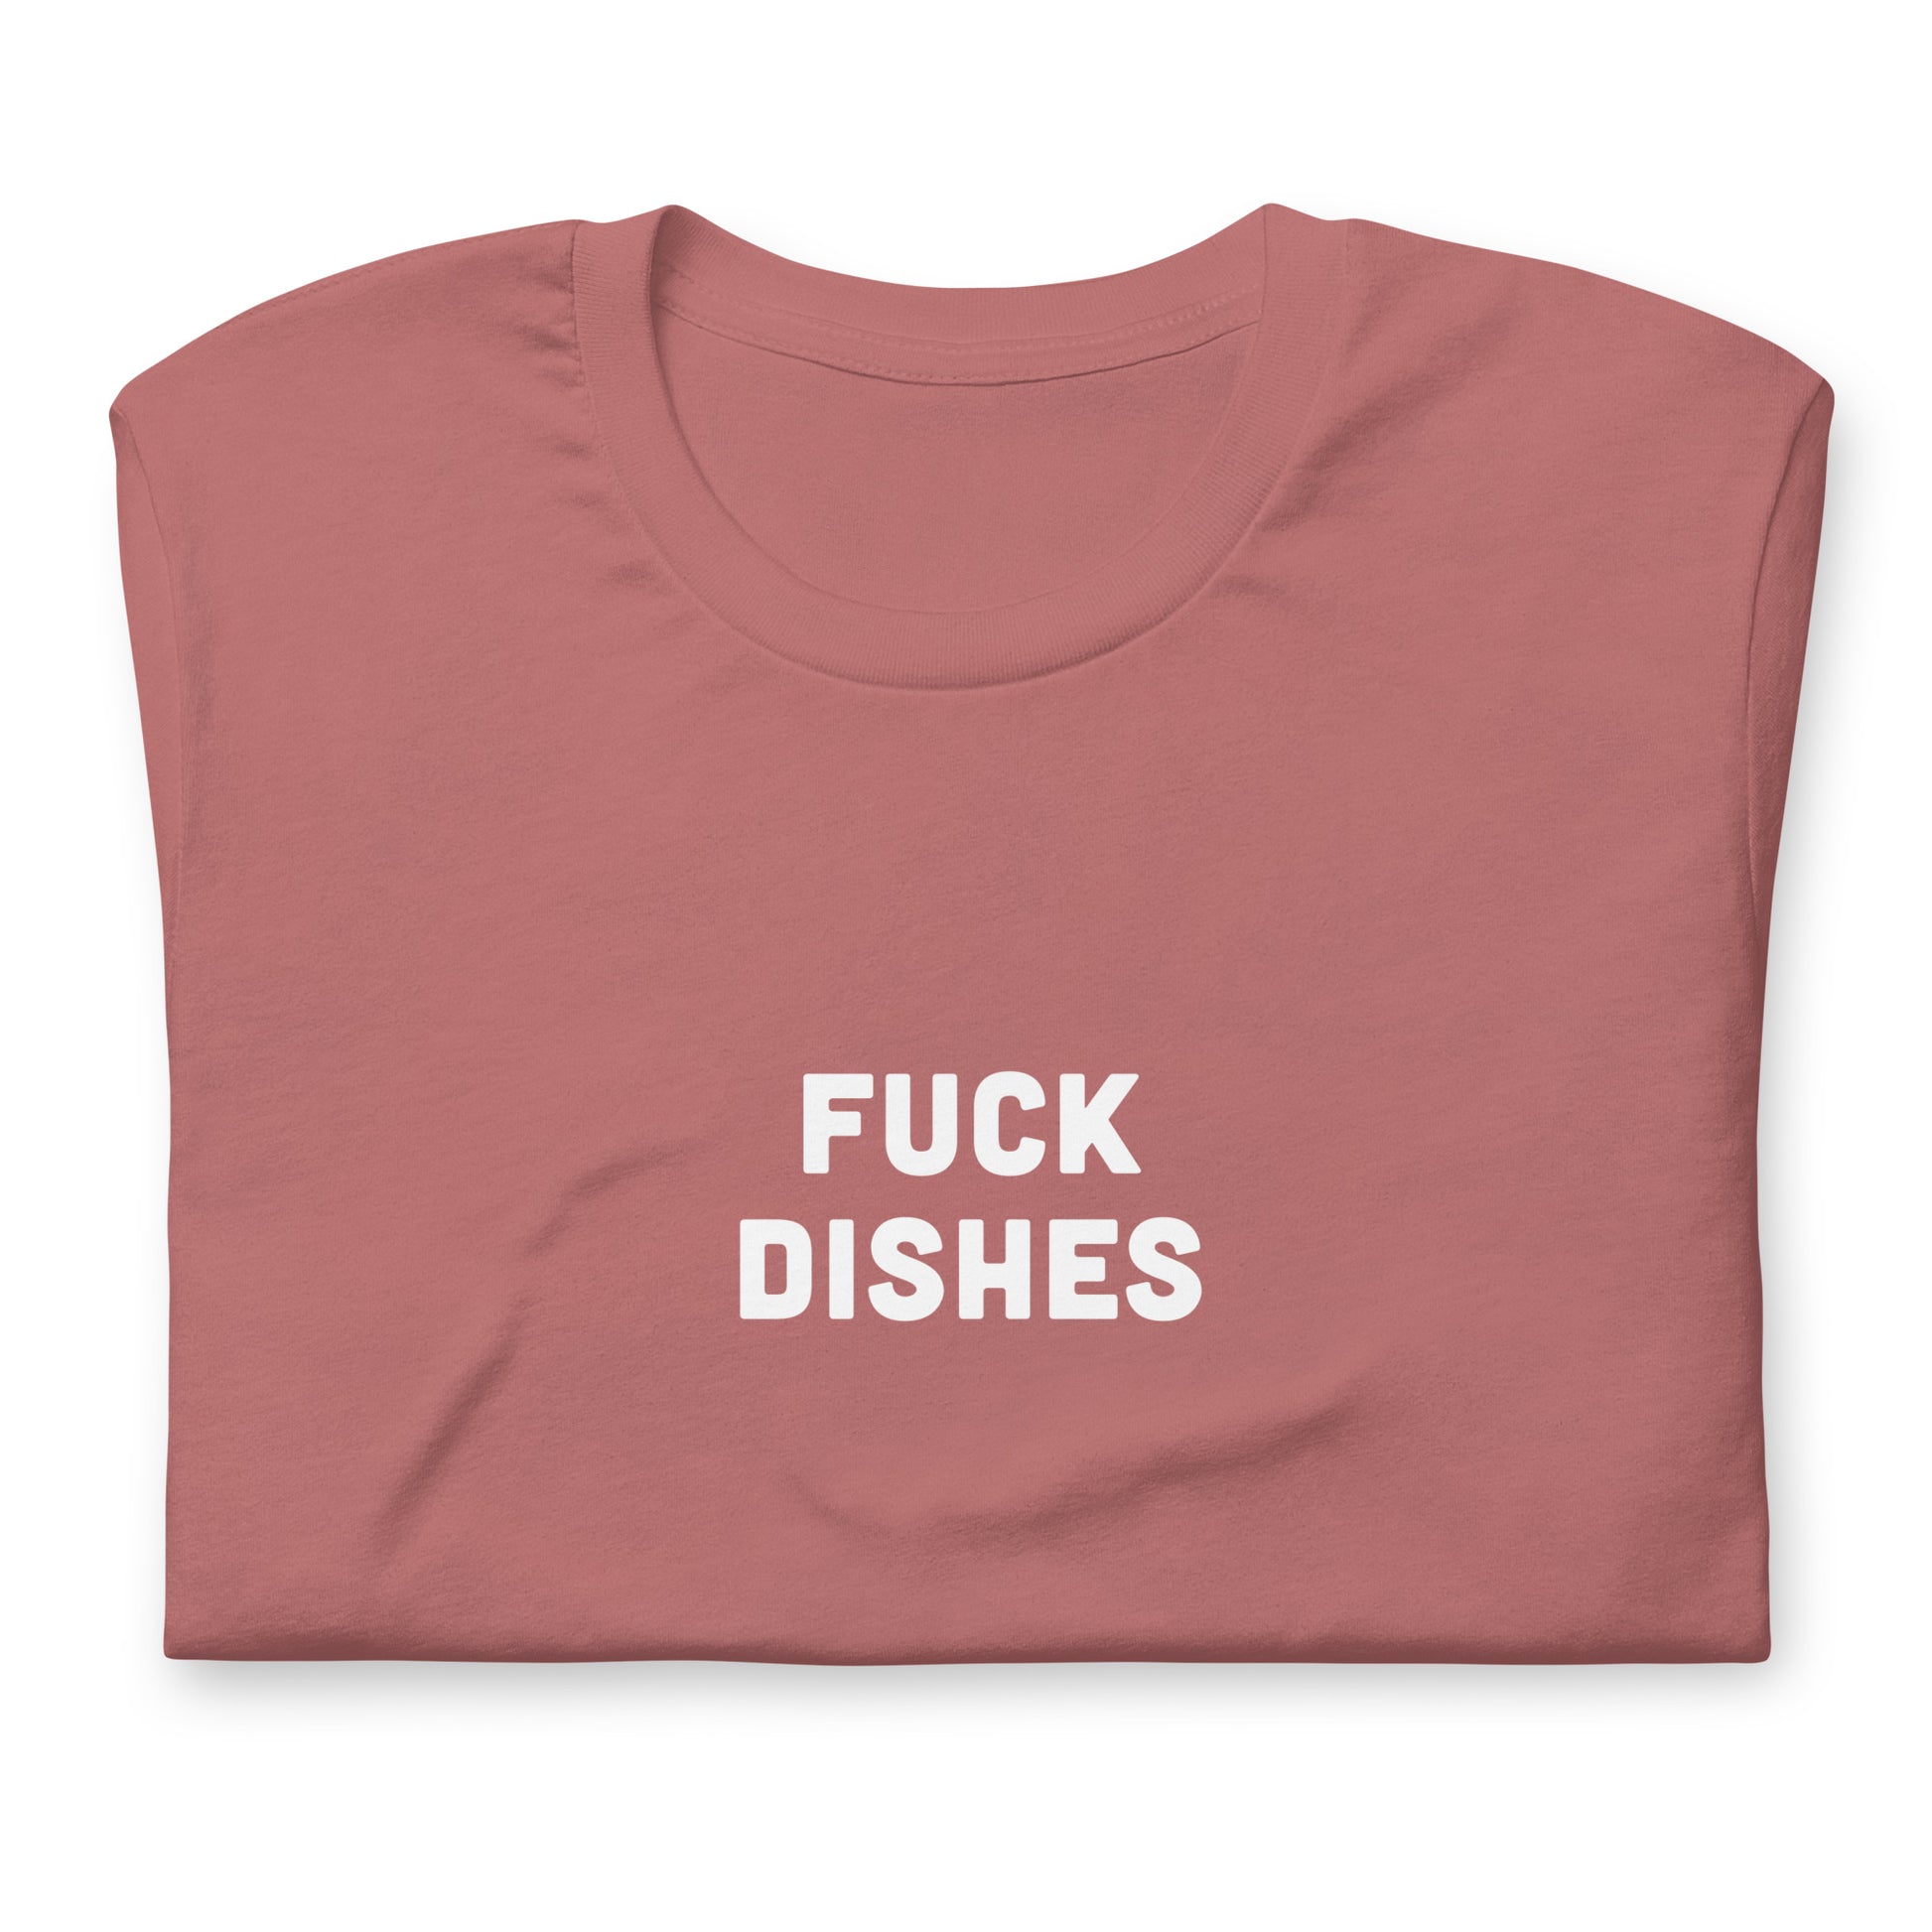 Fuck Dishes T-Shirt Size 2XL Color Navy